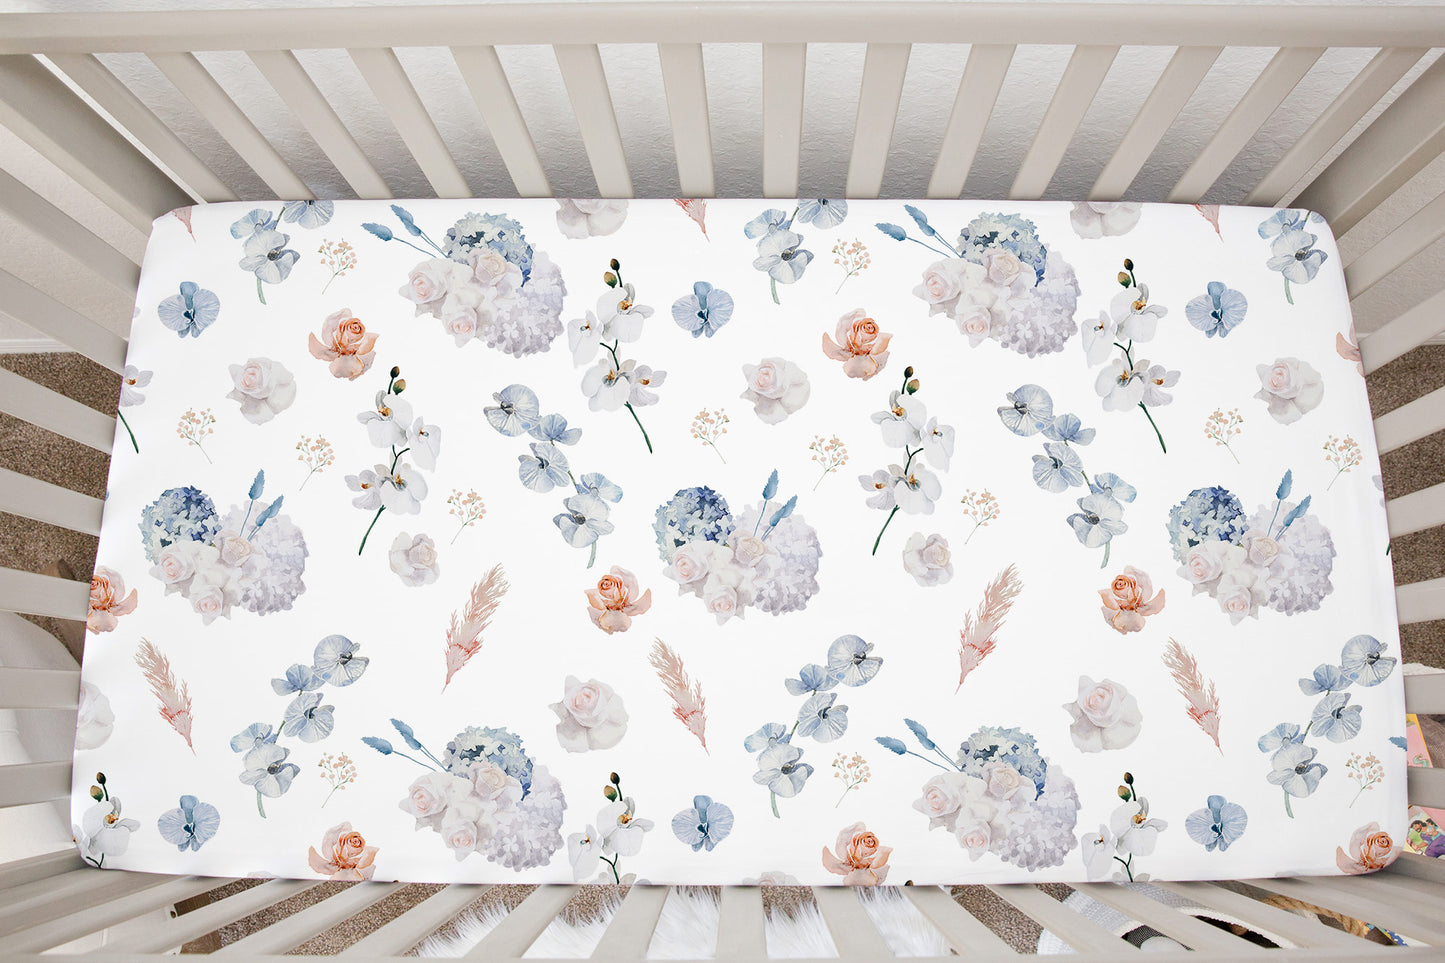 Coral and Dusty Blue Flowers Crib Sheet, Flora Nursery Bedding -Delicate Breeze